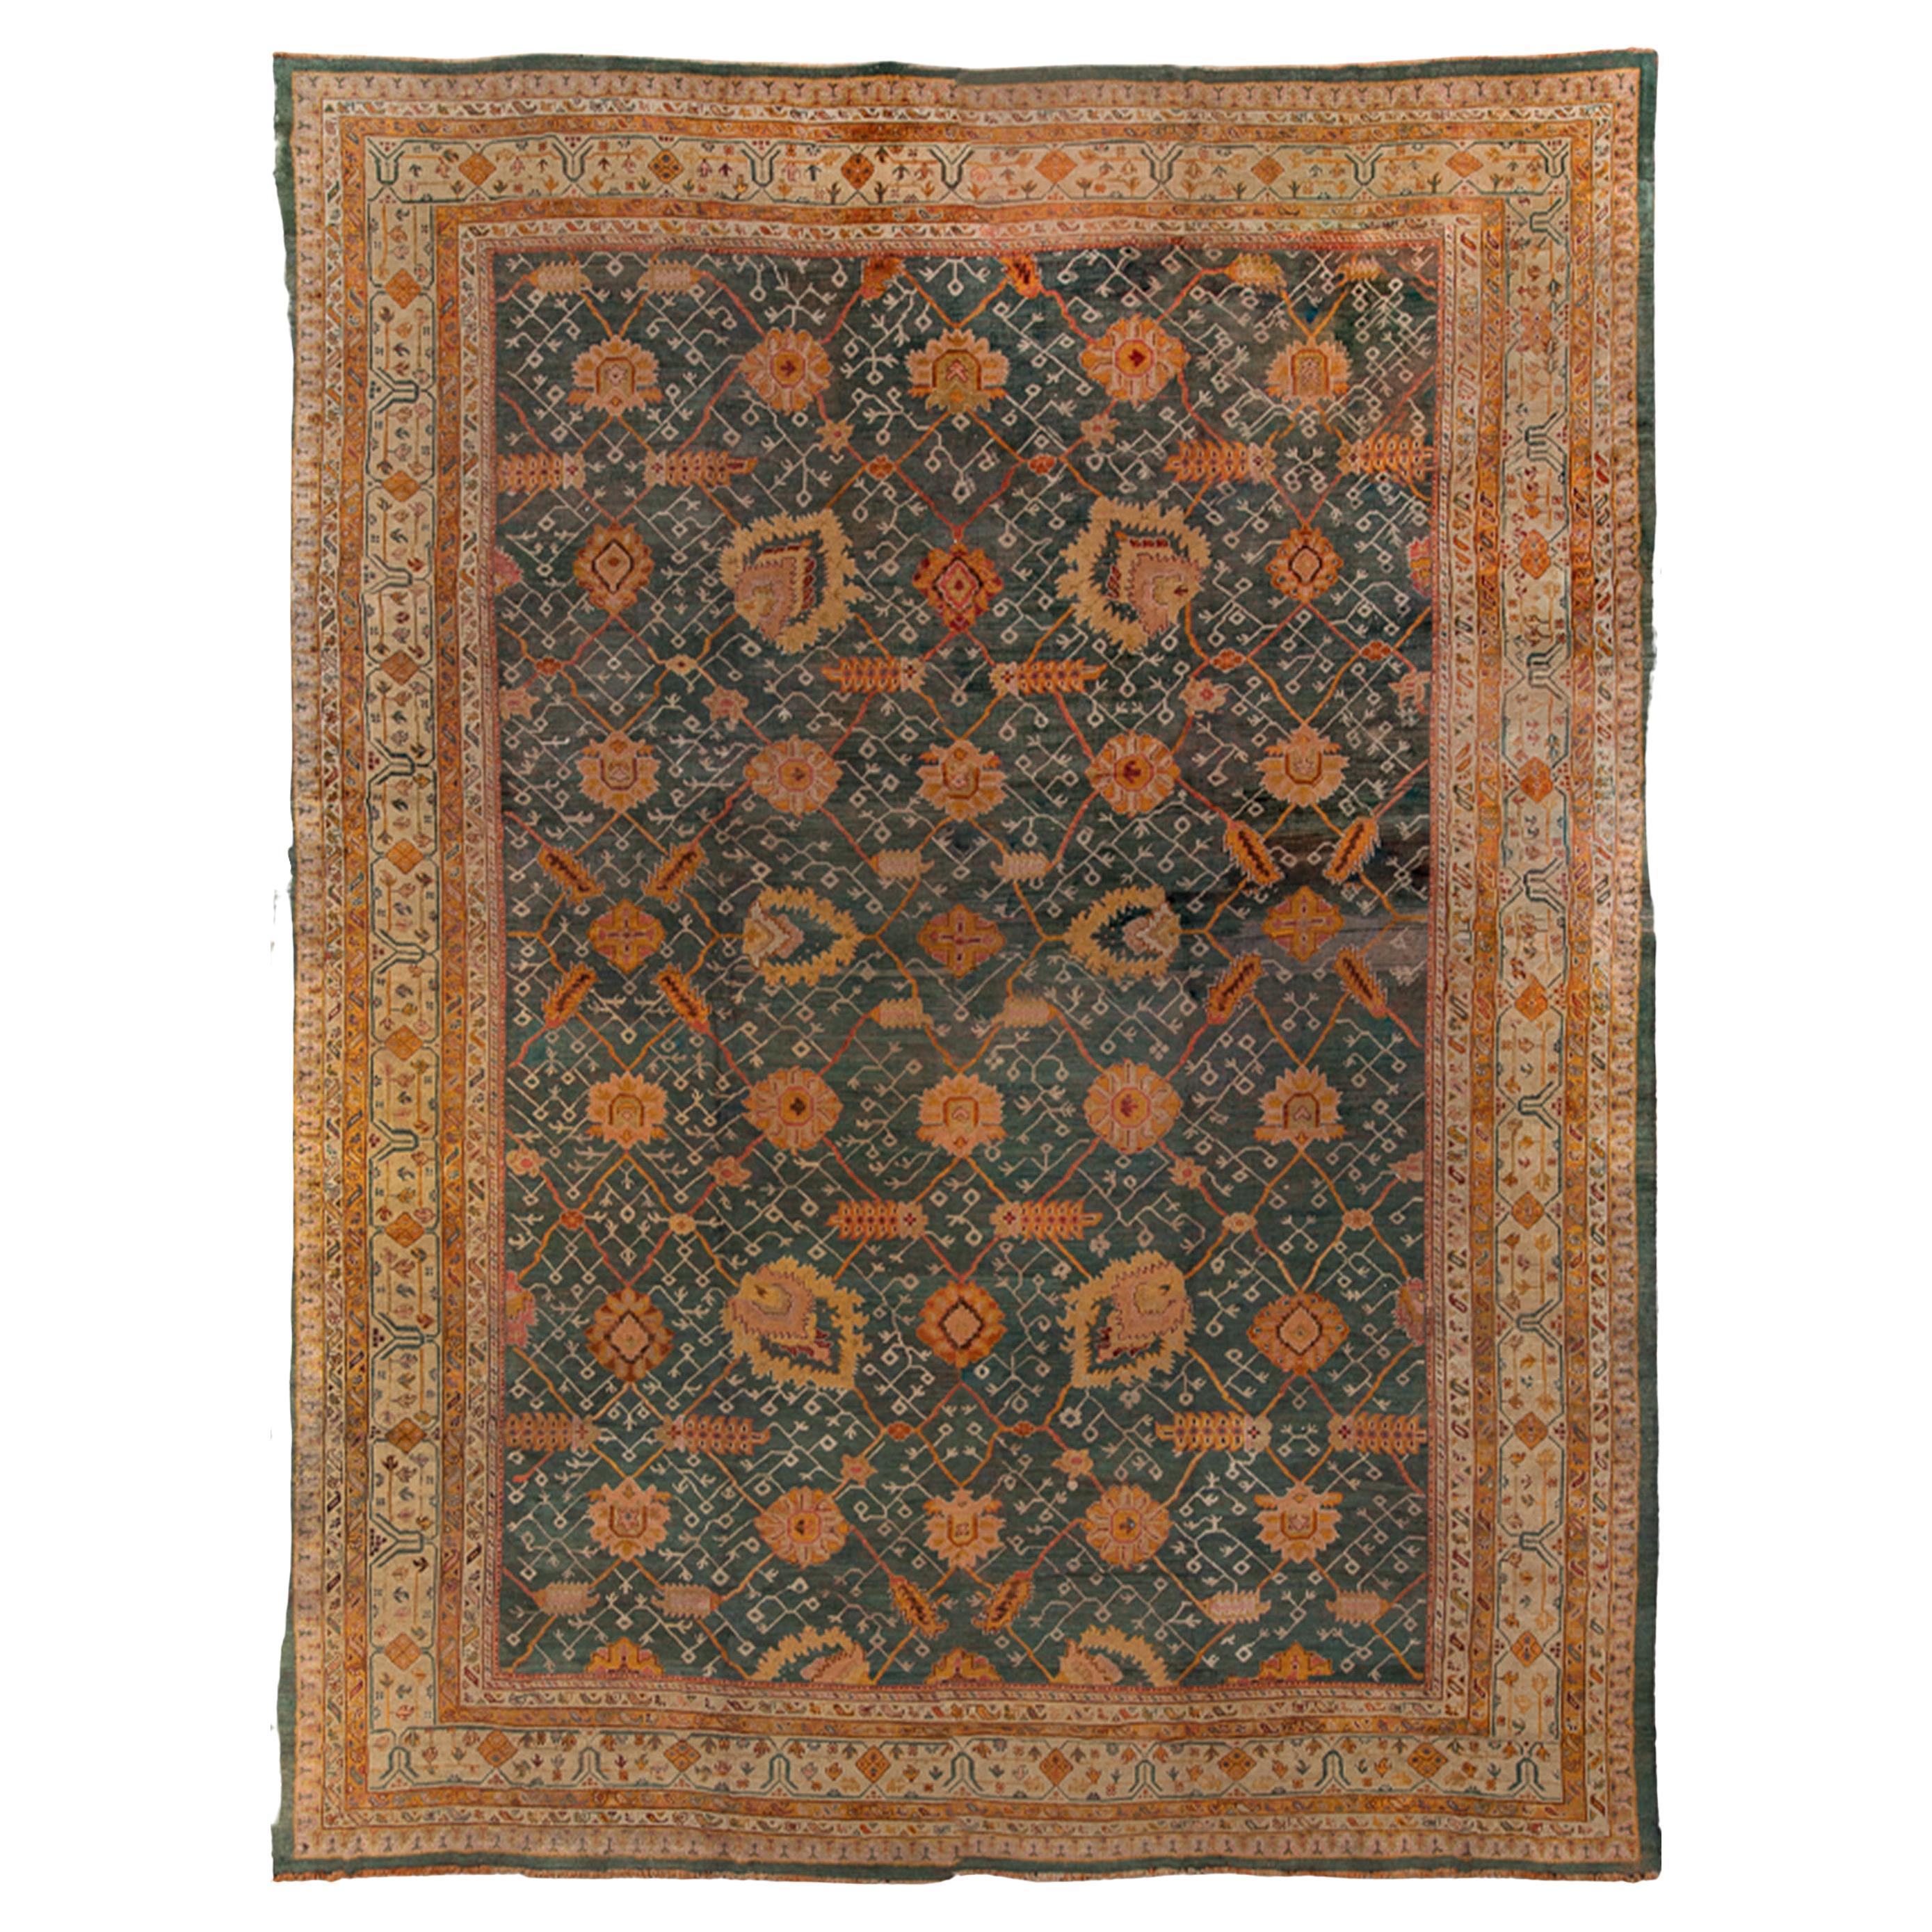 Antique Turkish Oushak Handwoven Luxury Wool Multi Rug 15'-3" X 19'-9" Size For Sale